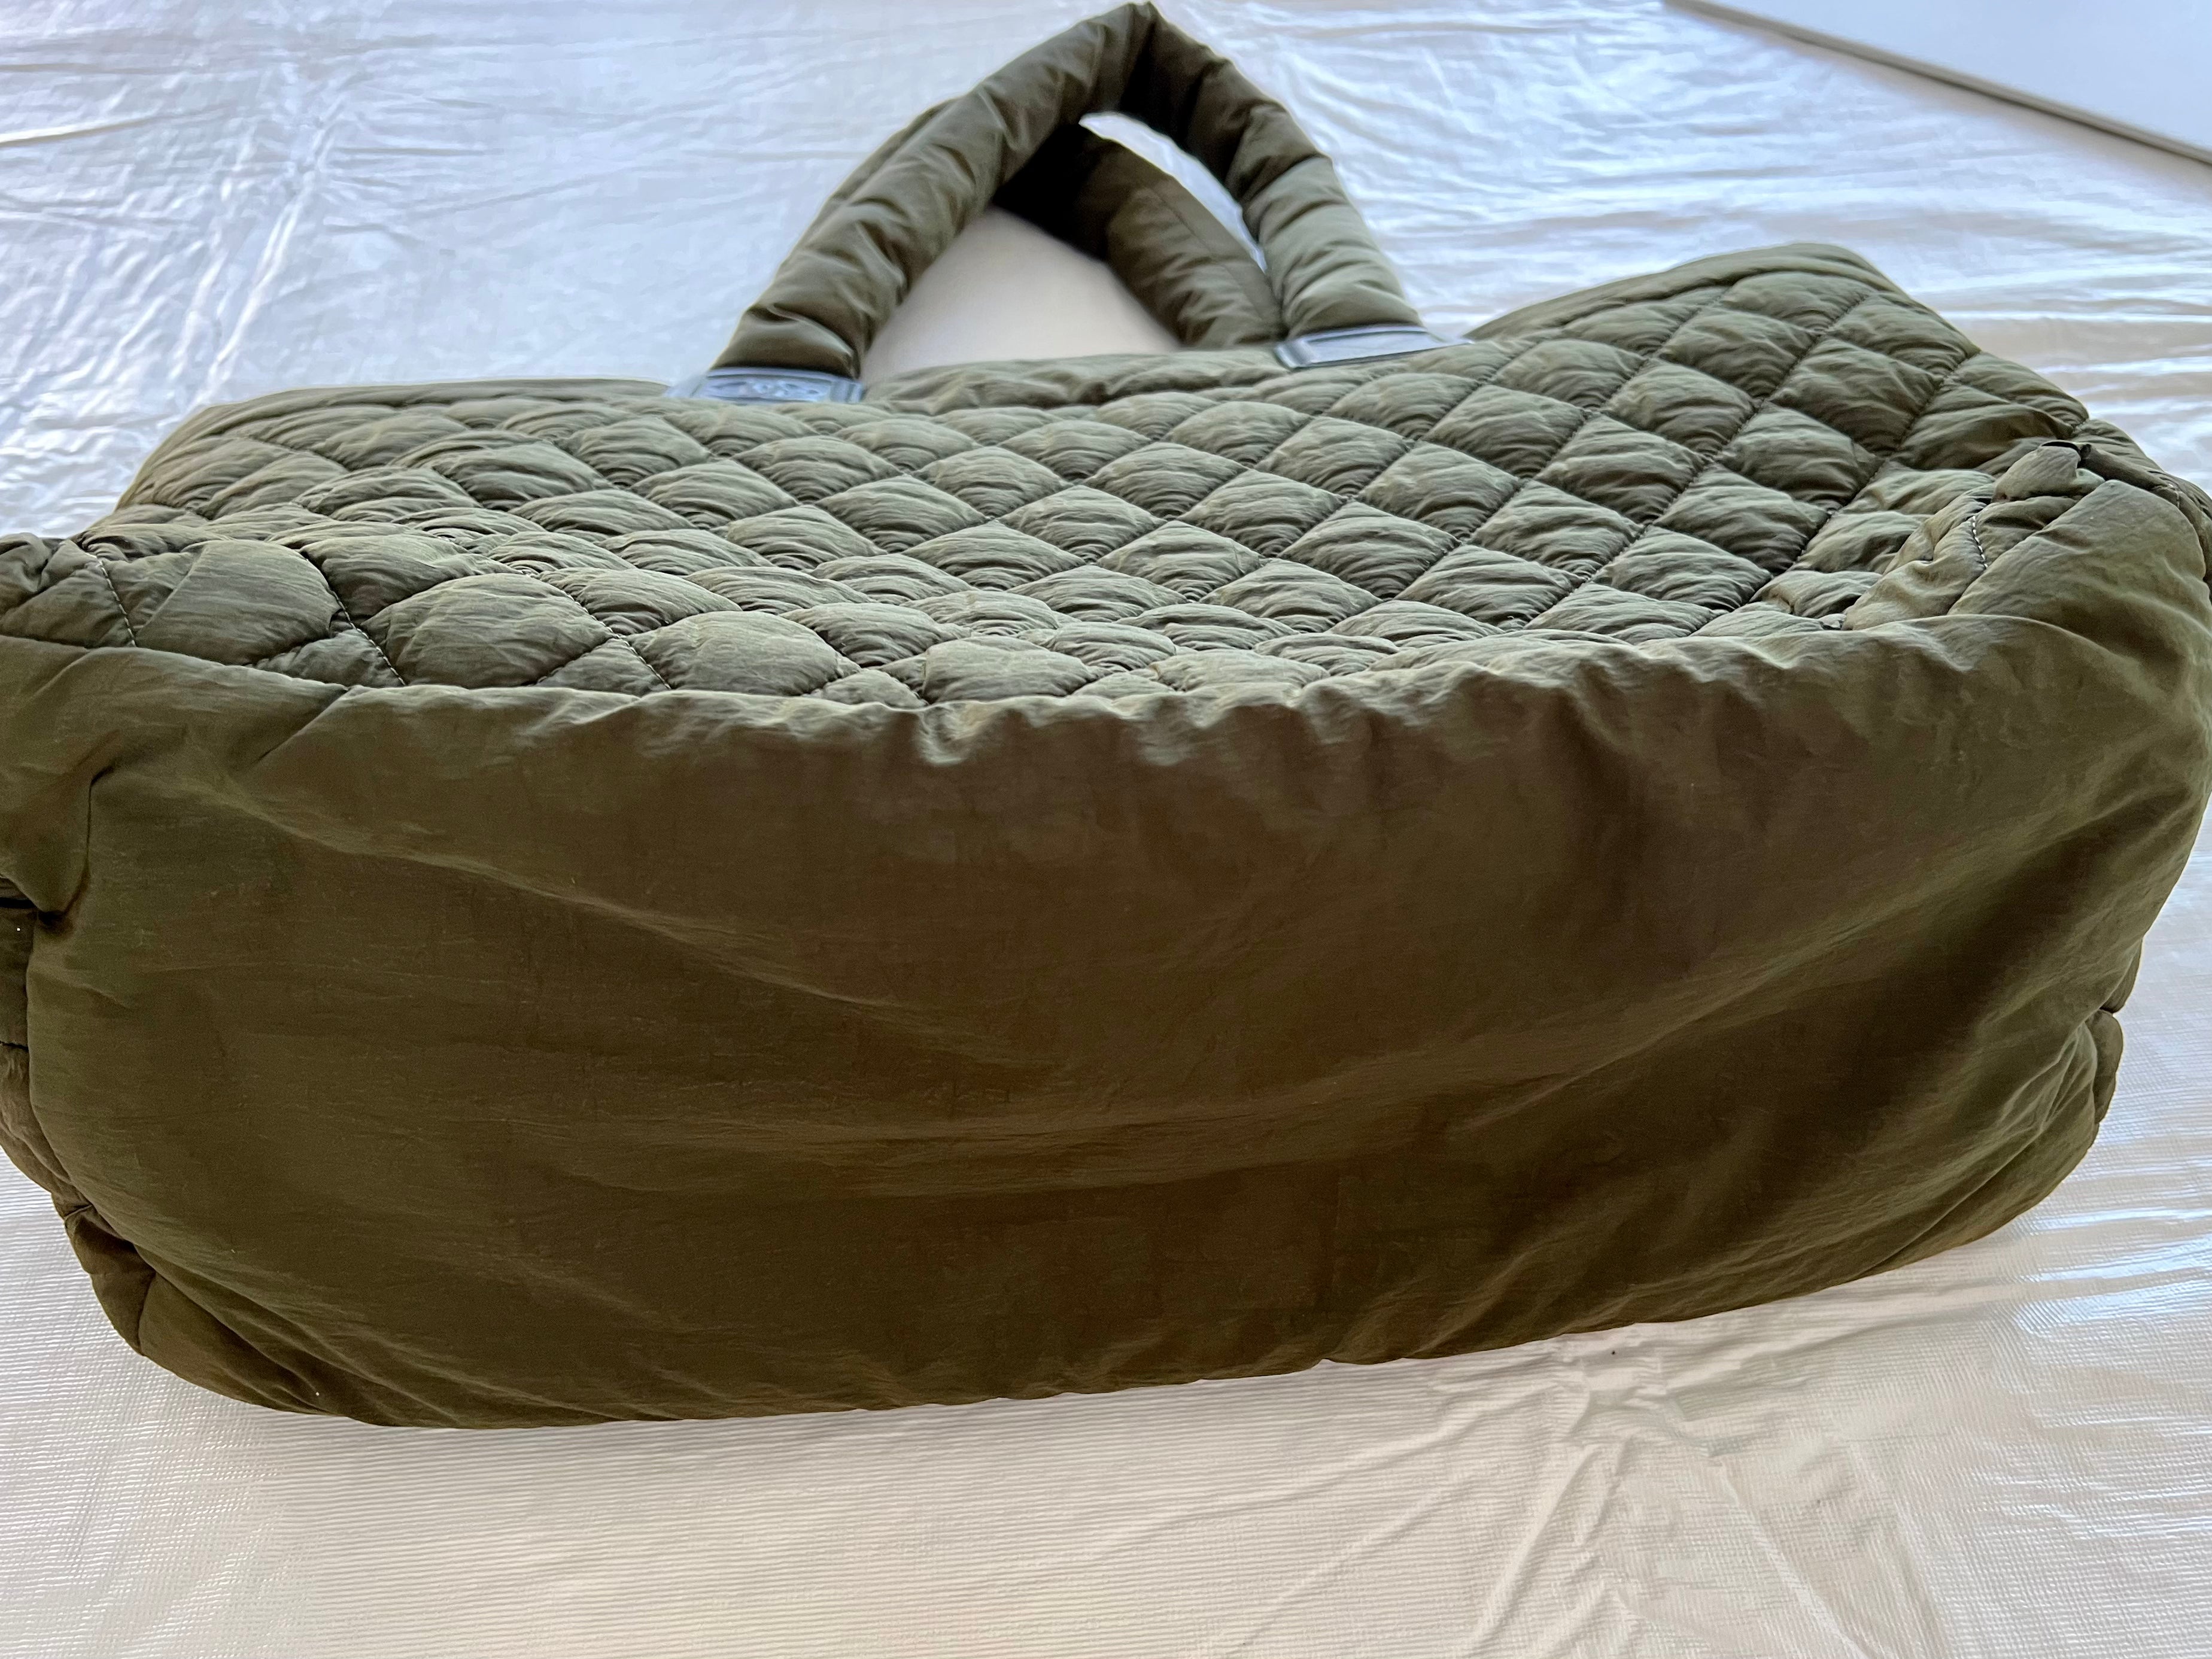 PREOWNED Chanel Nylon Quilted Coco Cocoon Tote Olive Green